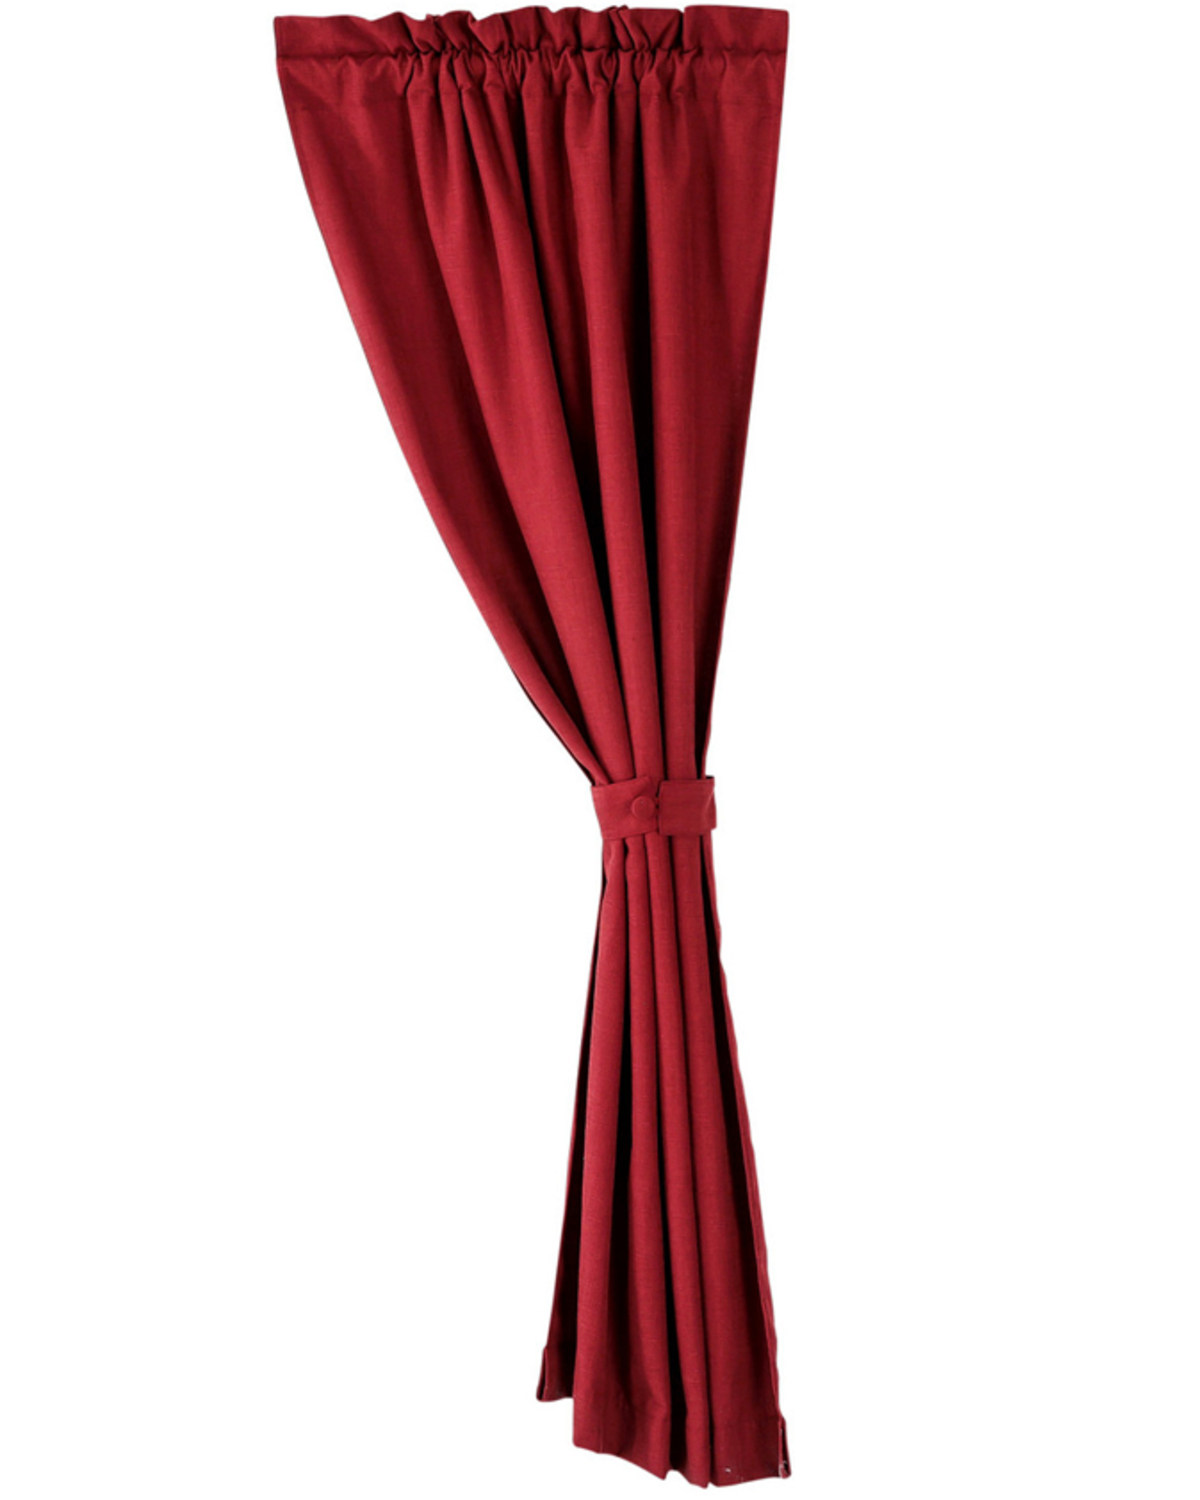 HiEnd Accents Red Textured Curtain